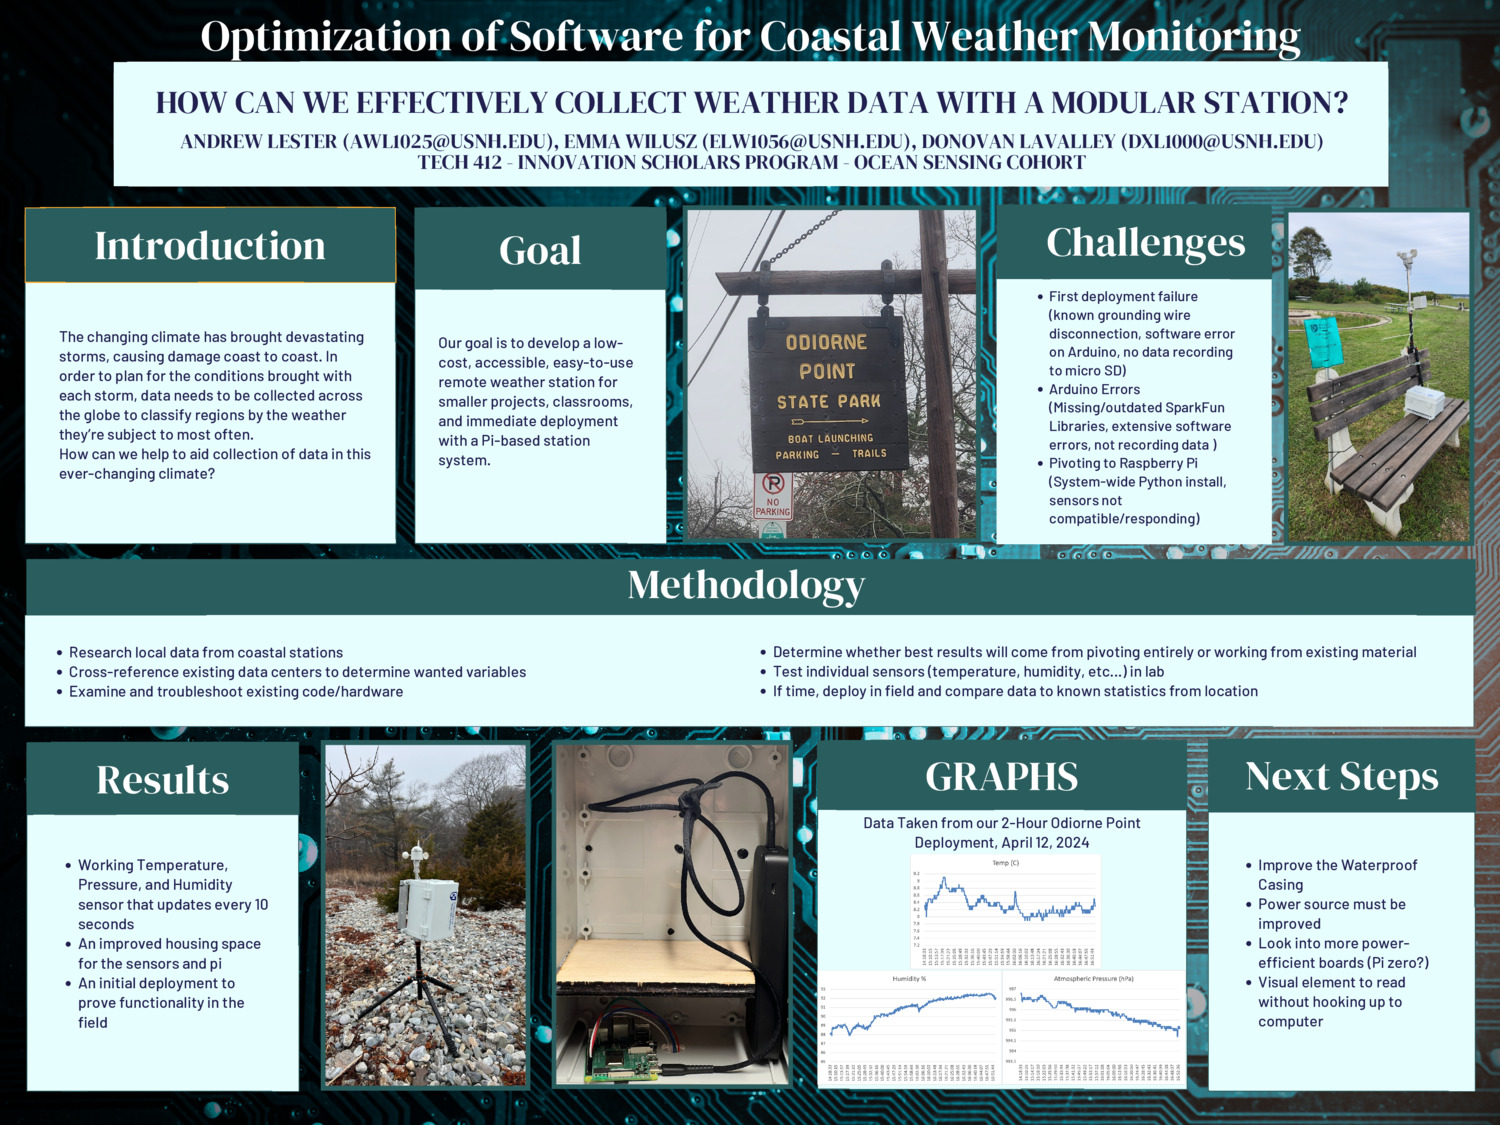 Optimization Of Software For Coastal Weather Monitoring by DonovanLaValley